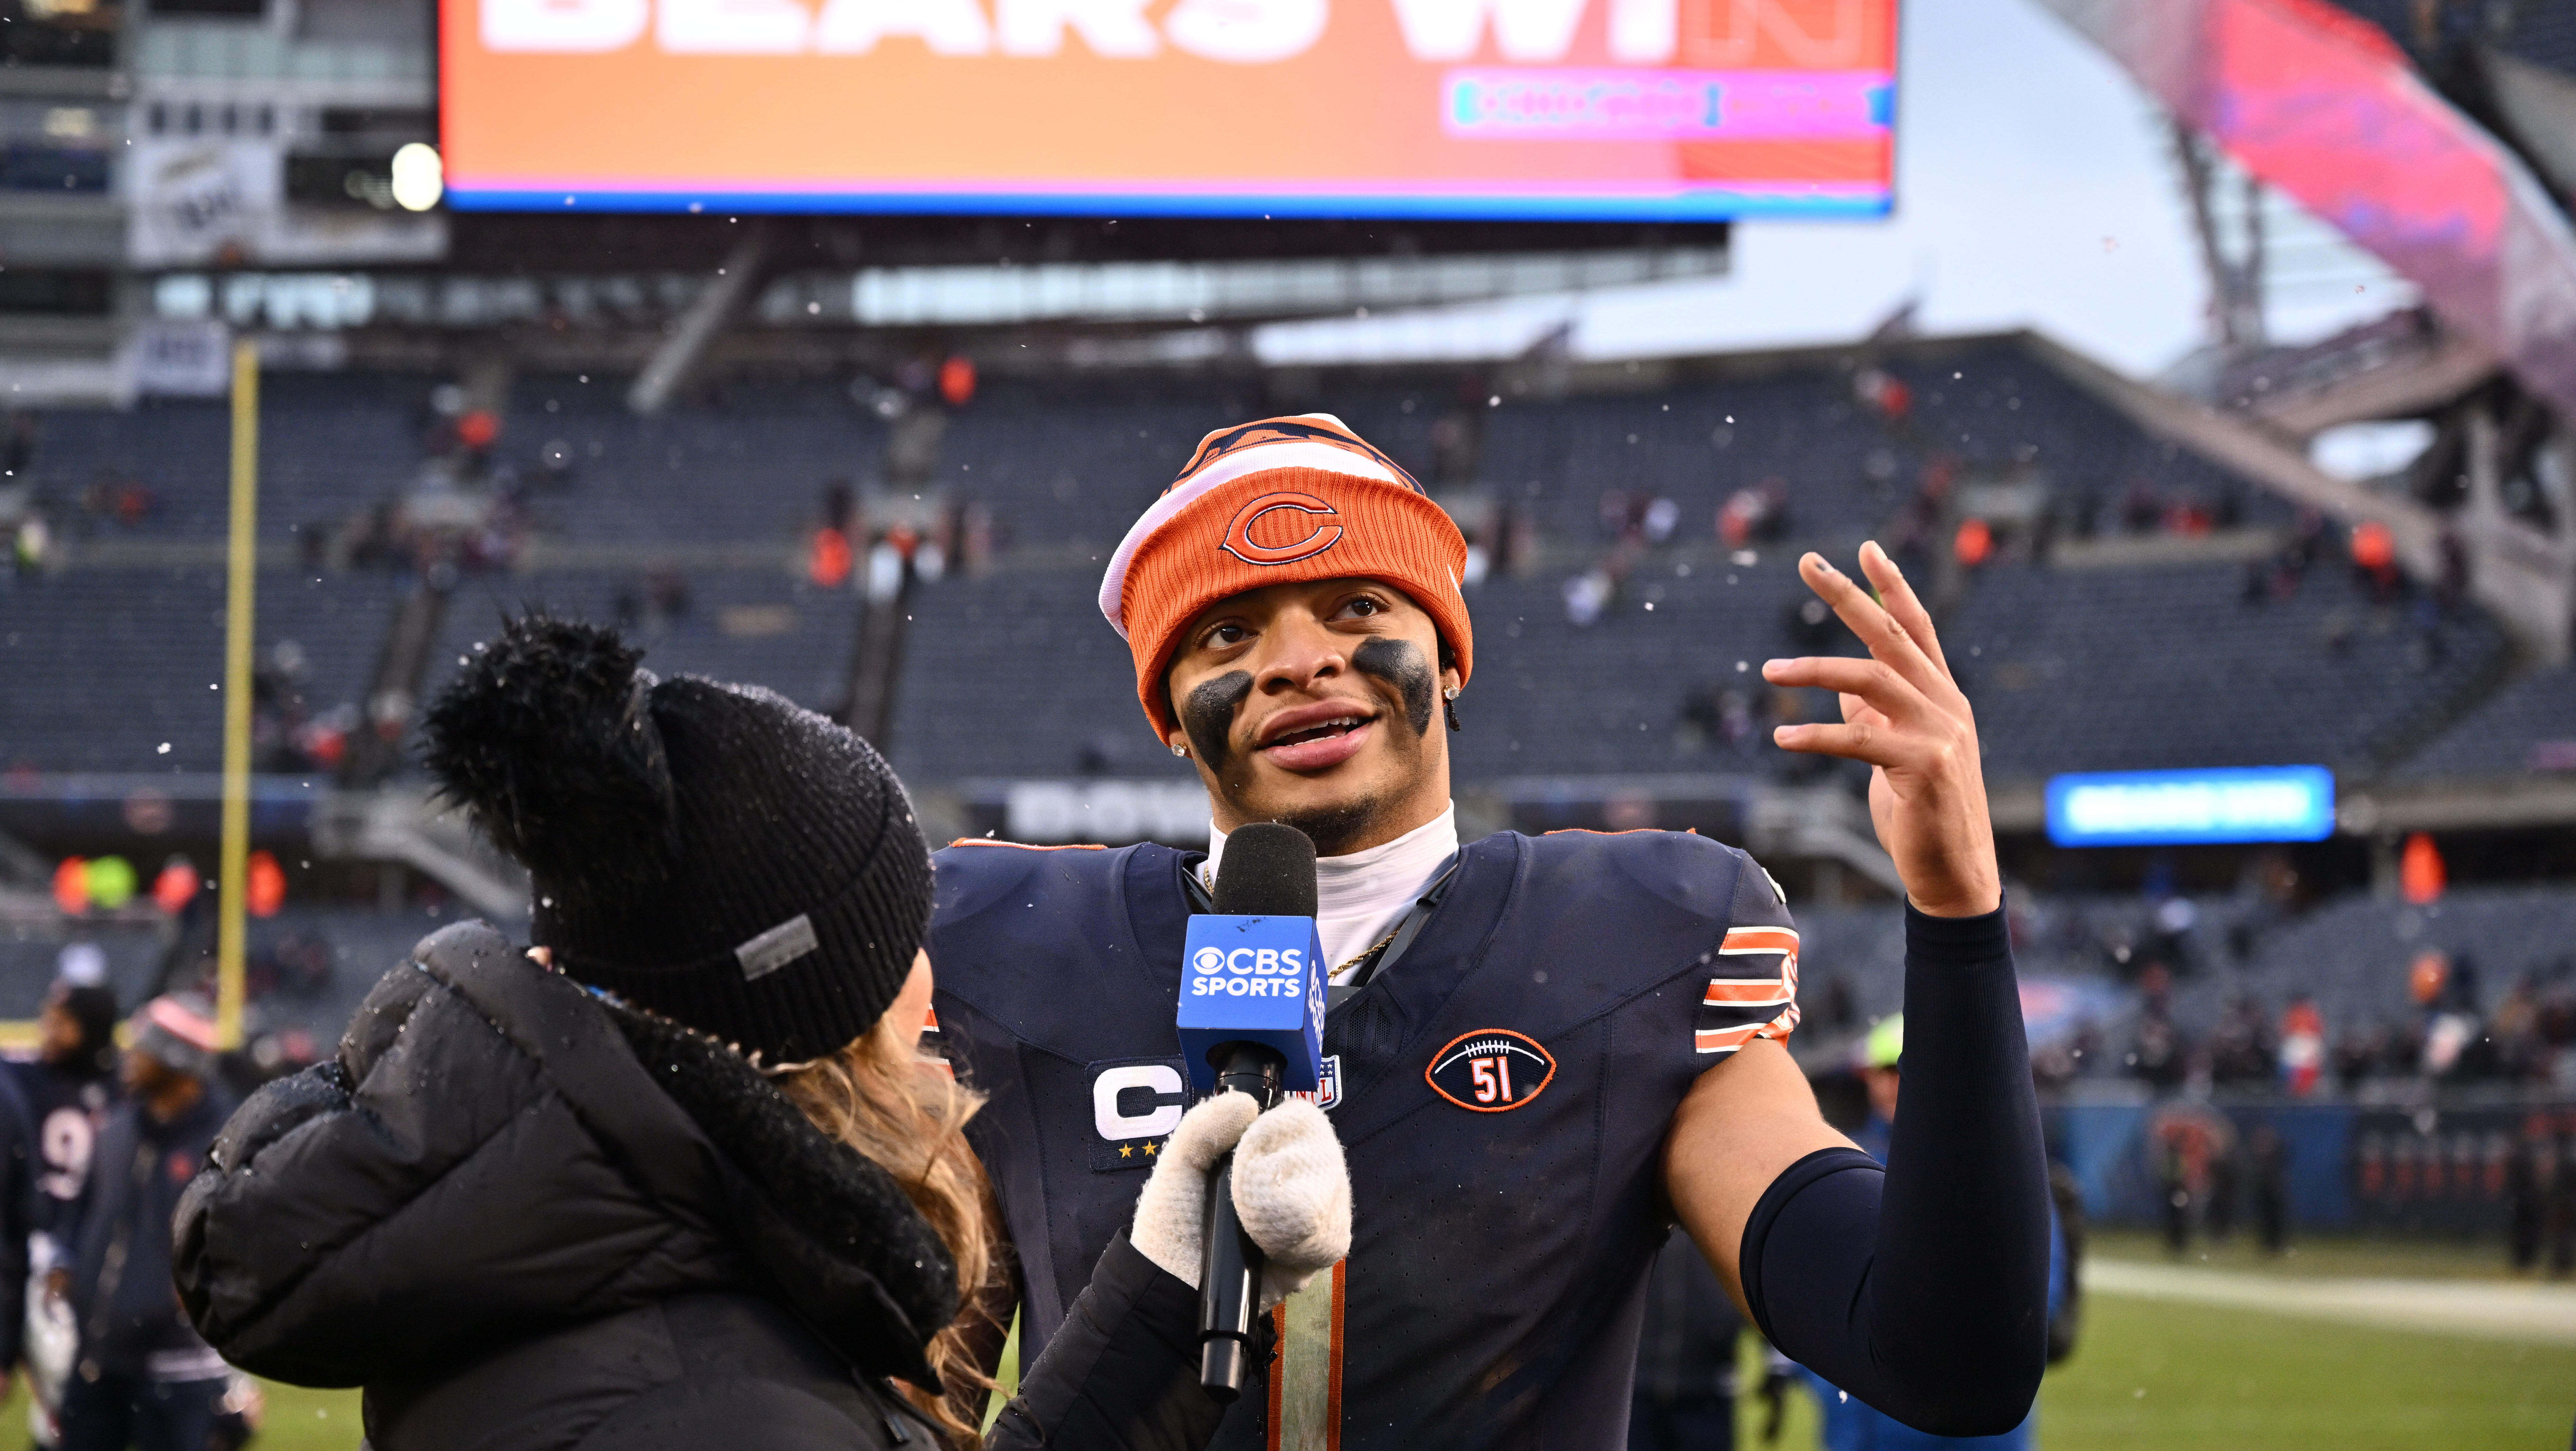 Justin Fields speaks with reporter after Bears win.